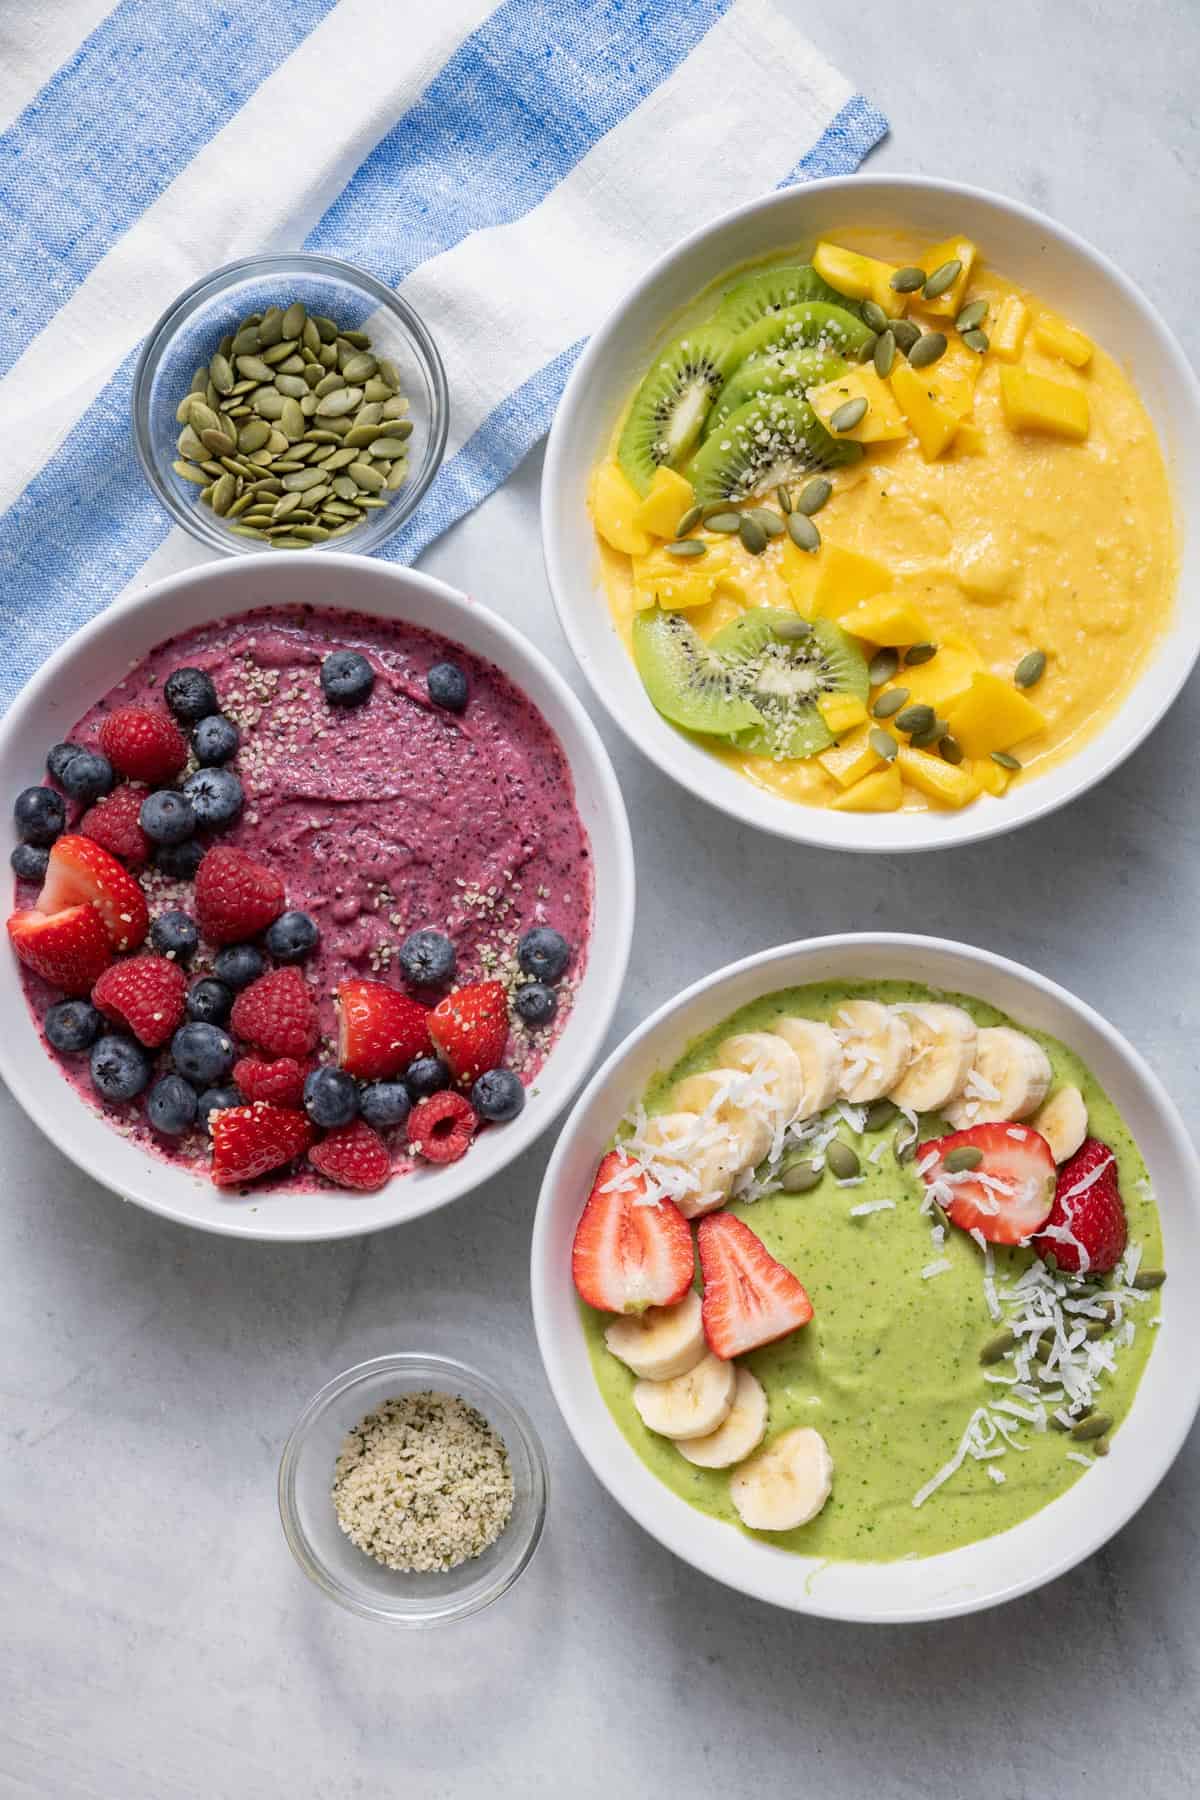 My FeelGood Smoothie Bowls are a refreshing and nutritious breakfast or snack idea. You can make them with with any frozen fruits of choice with a touch of milk, like coconut milk. There are three variations in this recipe, one with banana/mango, one with raspberries/strawberries, and one with blackberries/blueberries!